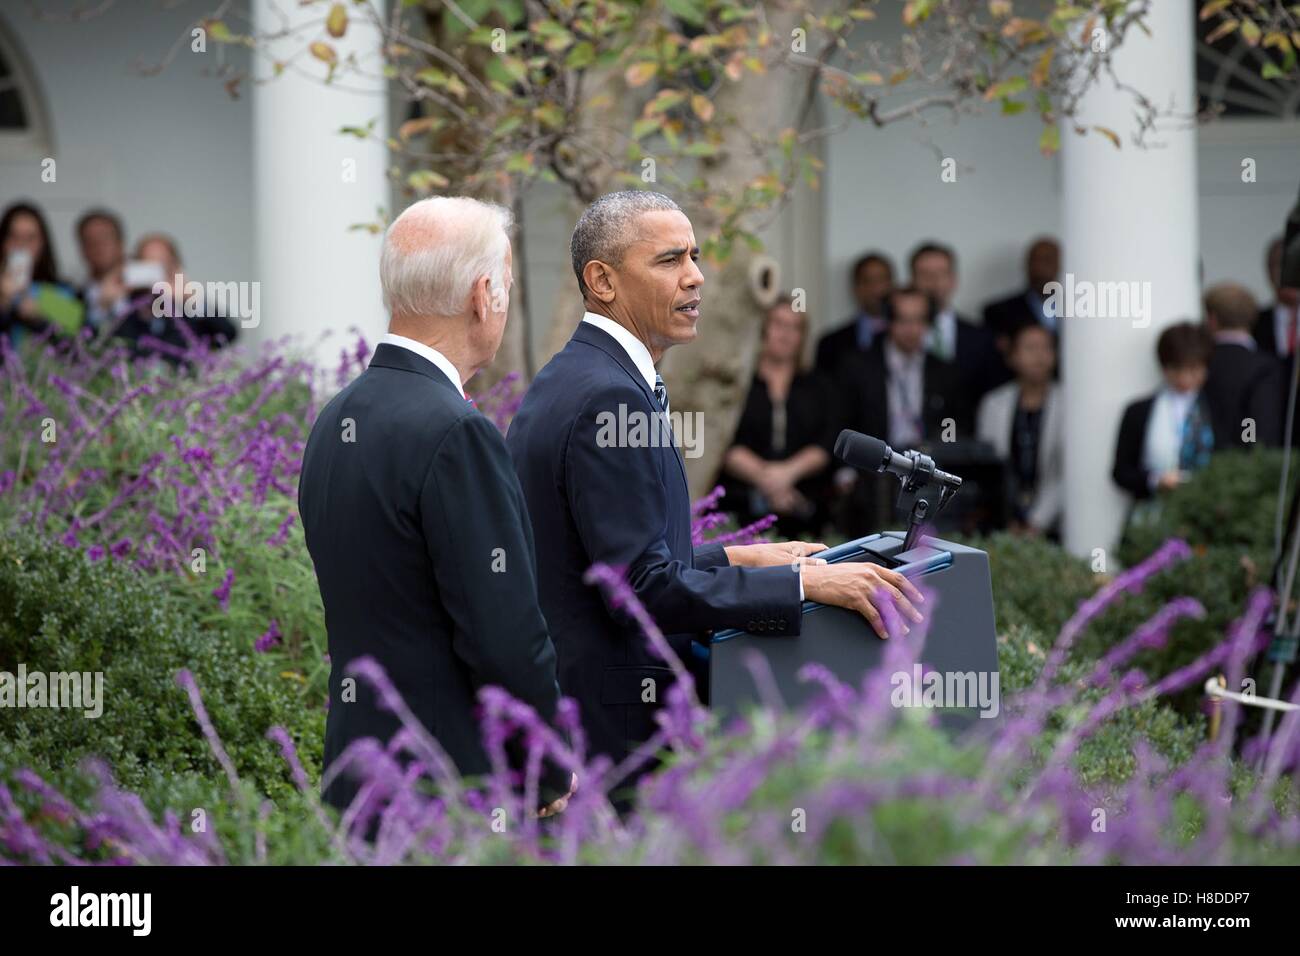 Washington DC, USA. 9th November, 2016. U.S President Barack Obama delivers a statement on the U.S. election results as Vice President Joe Biden looks on in the Rose Garden of the White House November 9, 2016 in Washington, DC. Credit:  Planetpix/Alamy Live News Stock Photo